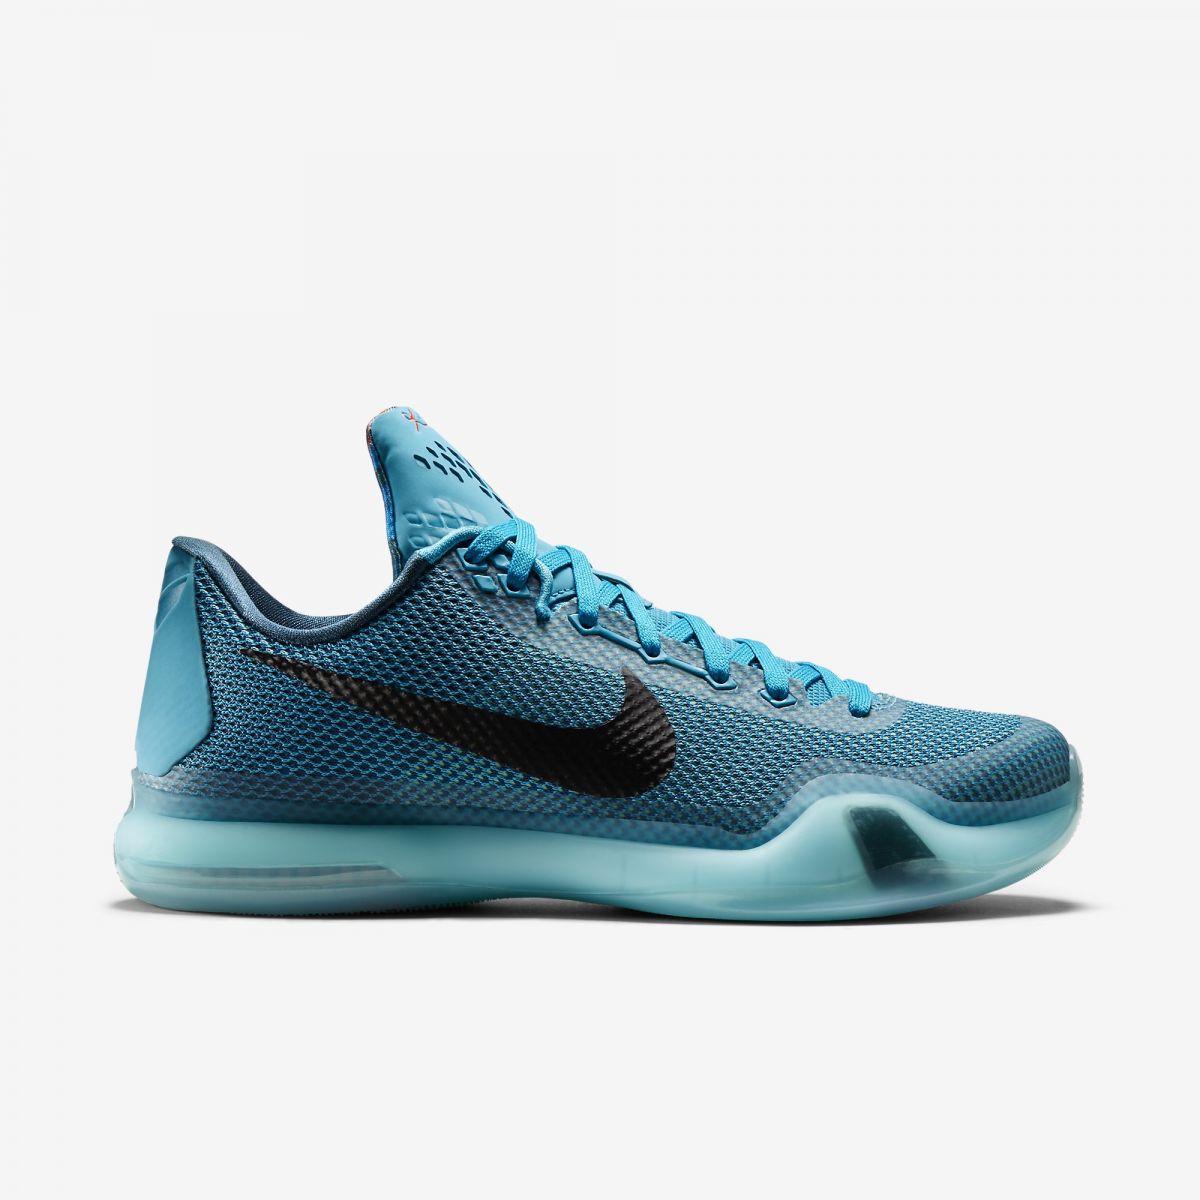 The Complete Guide To The Nike Kobe 10 | Sole Collector